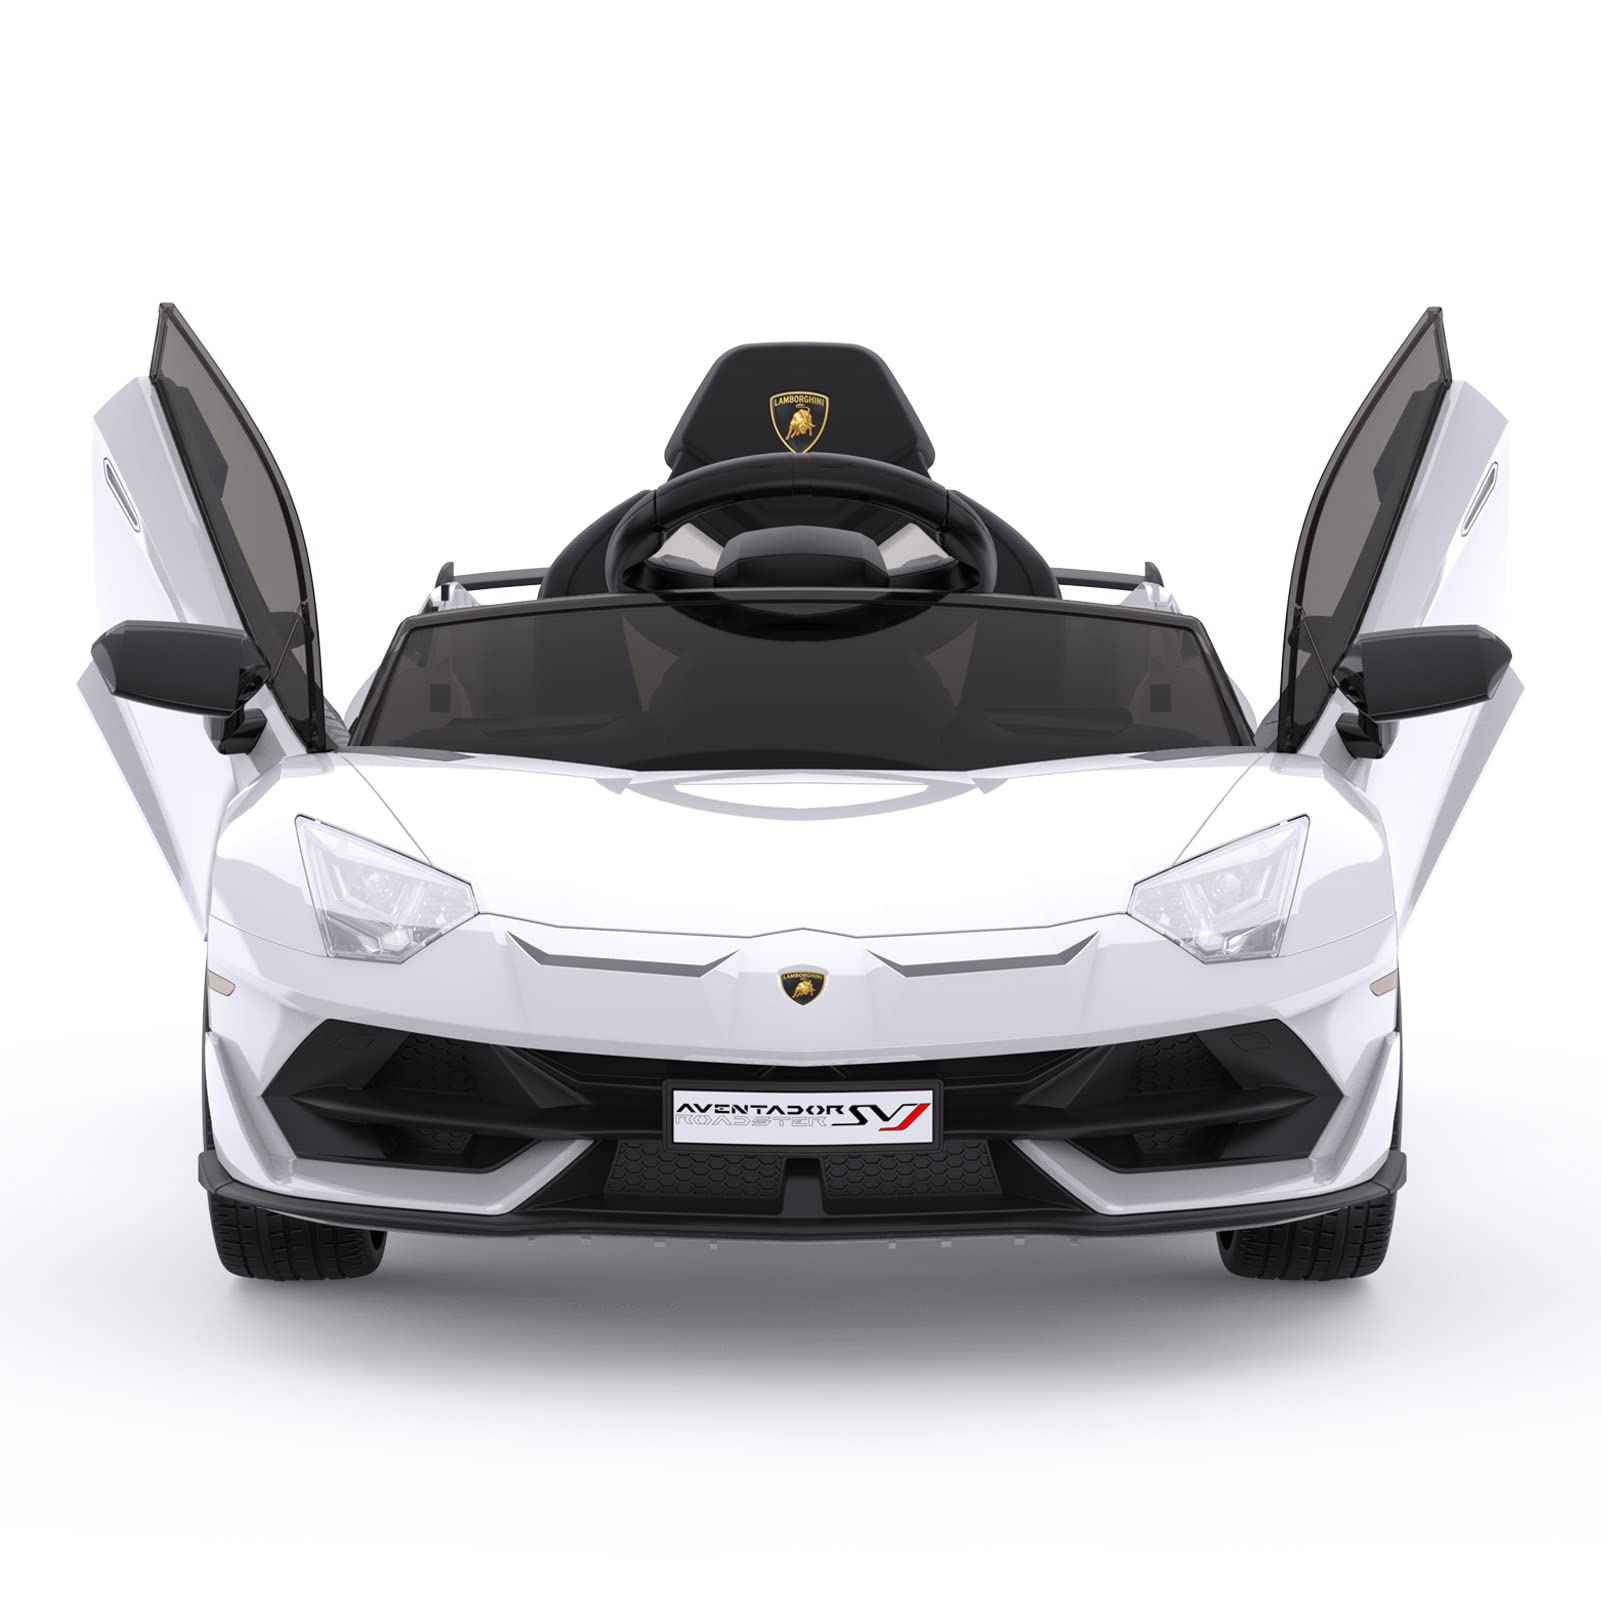 Ride on Car for Kids 12V Licensed Lamborghini Electric Vehicles Battery Powered Sports Car with Control, 2 Speeds, Sound System, LED Headlights and Hydraulic Doors